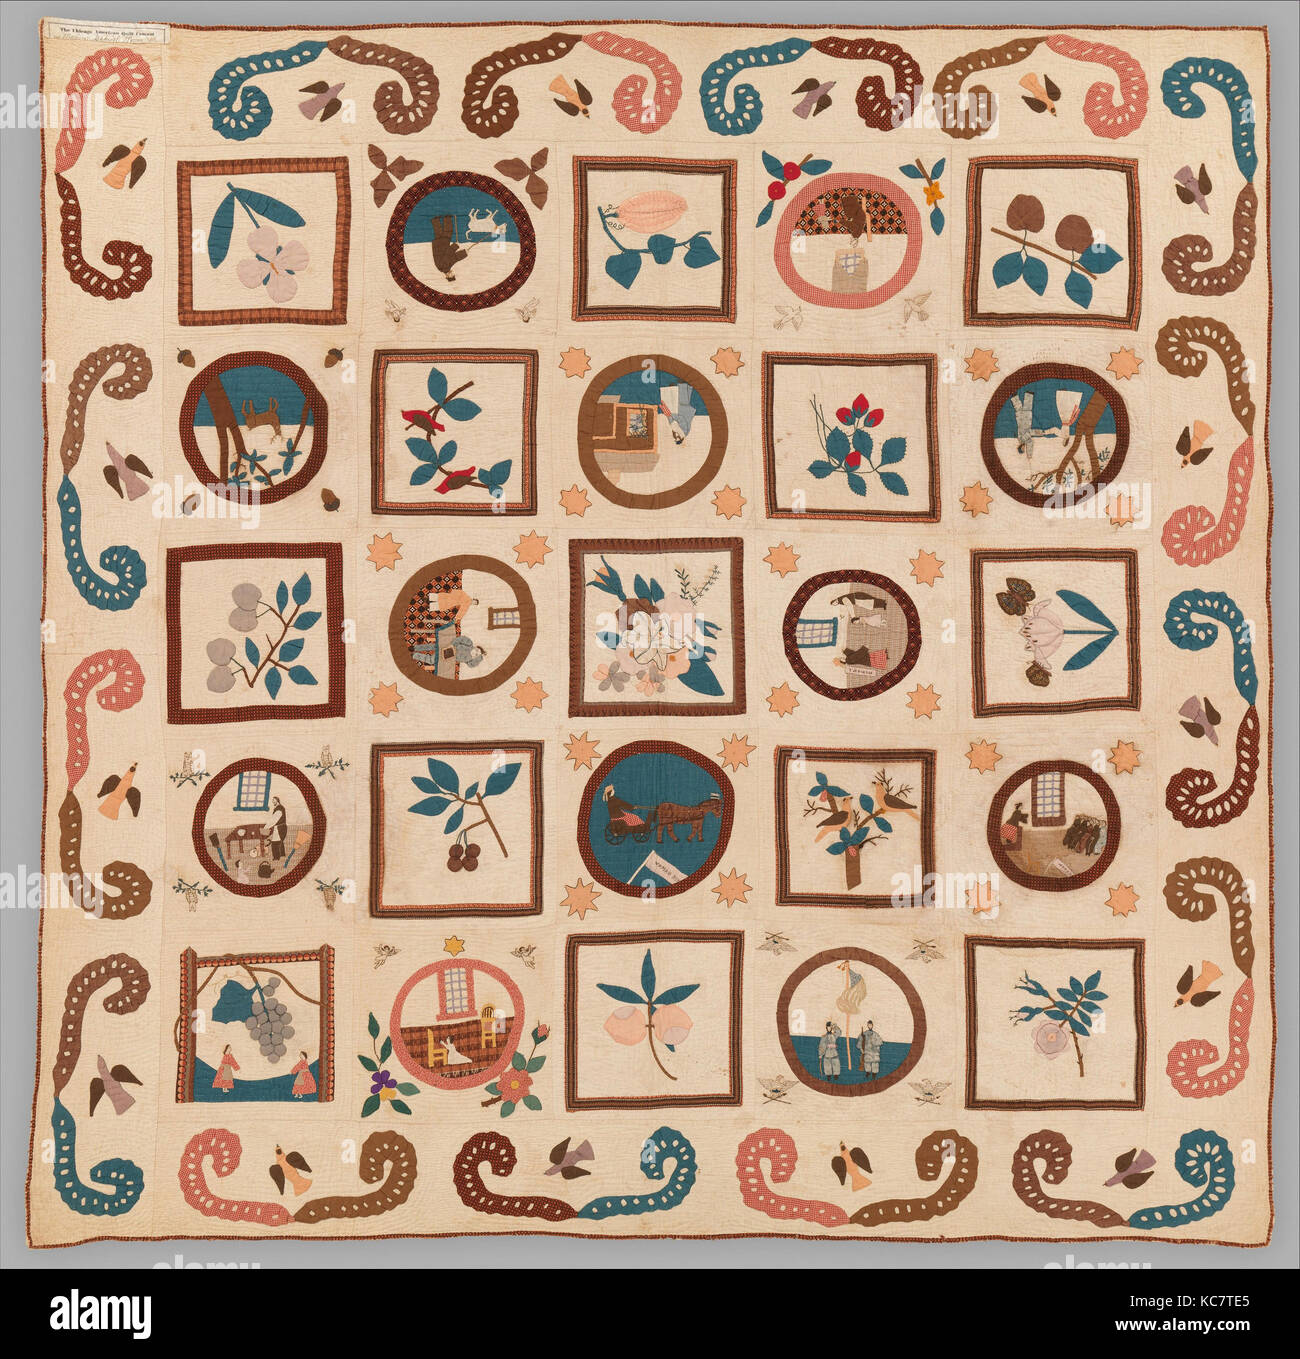 Woman’s Rights Quilt, ca. 1875, Made in Illinois, United States, American, Cotton, 70 × 69 1/2 in. (177.8 × 176.5 cm), Textiles Stock Photo